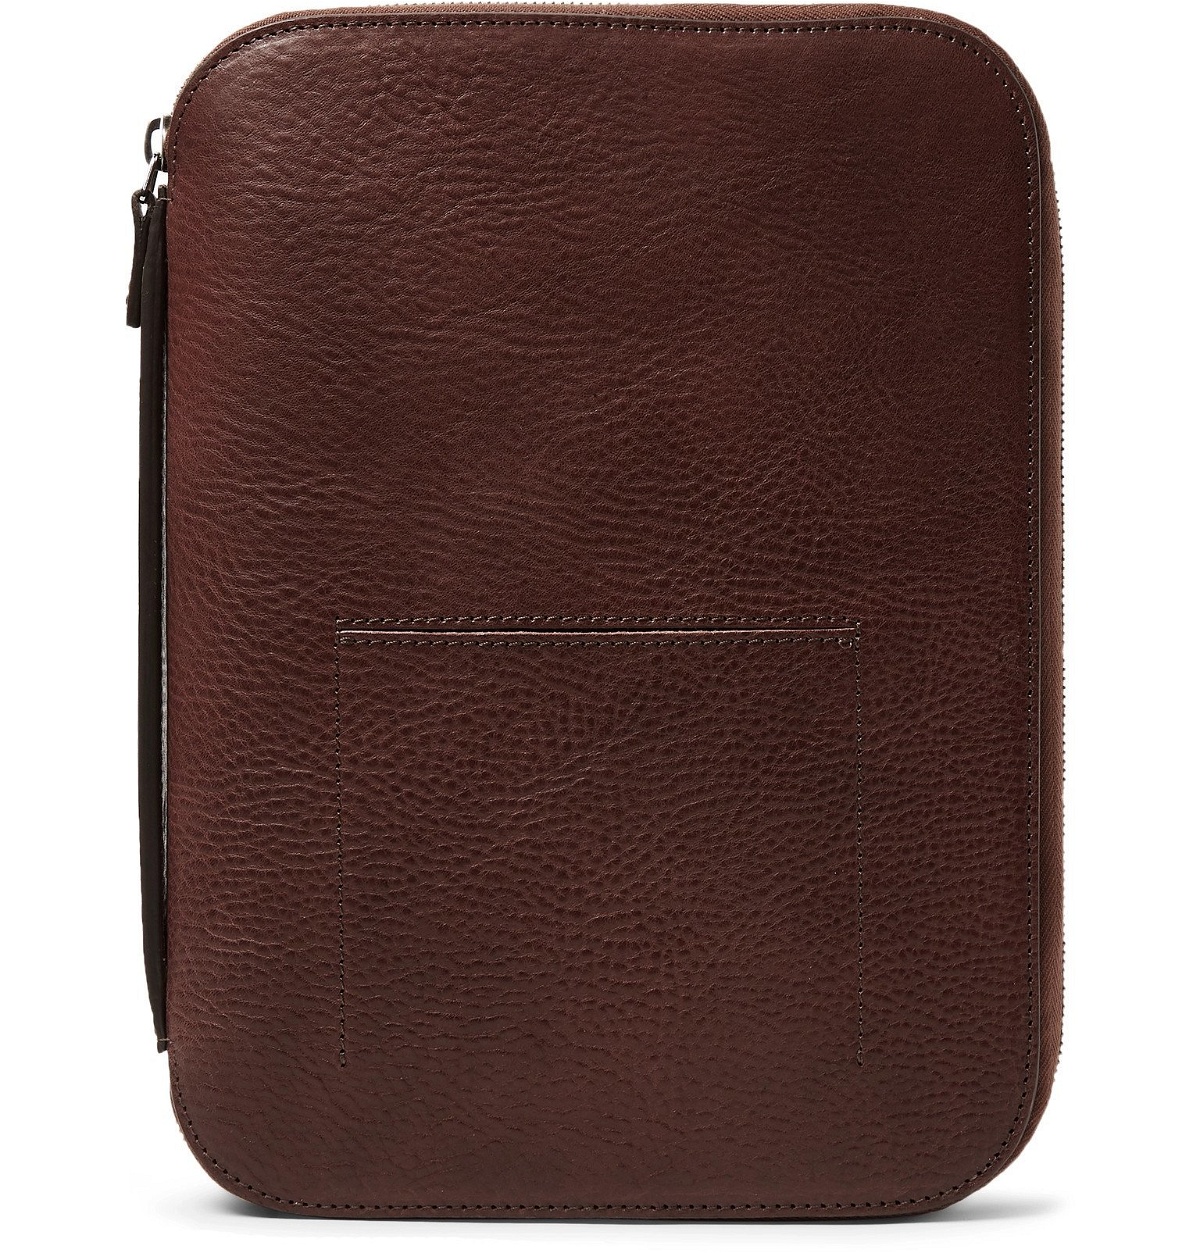 Photo: This Is Ground - Mod Tablet 5 Leather Pouch - Brown